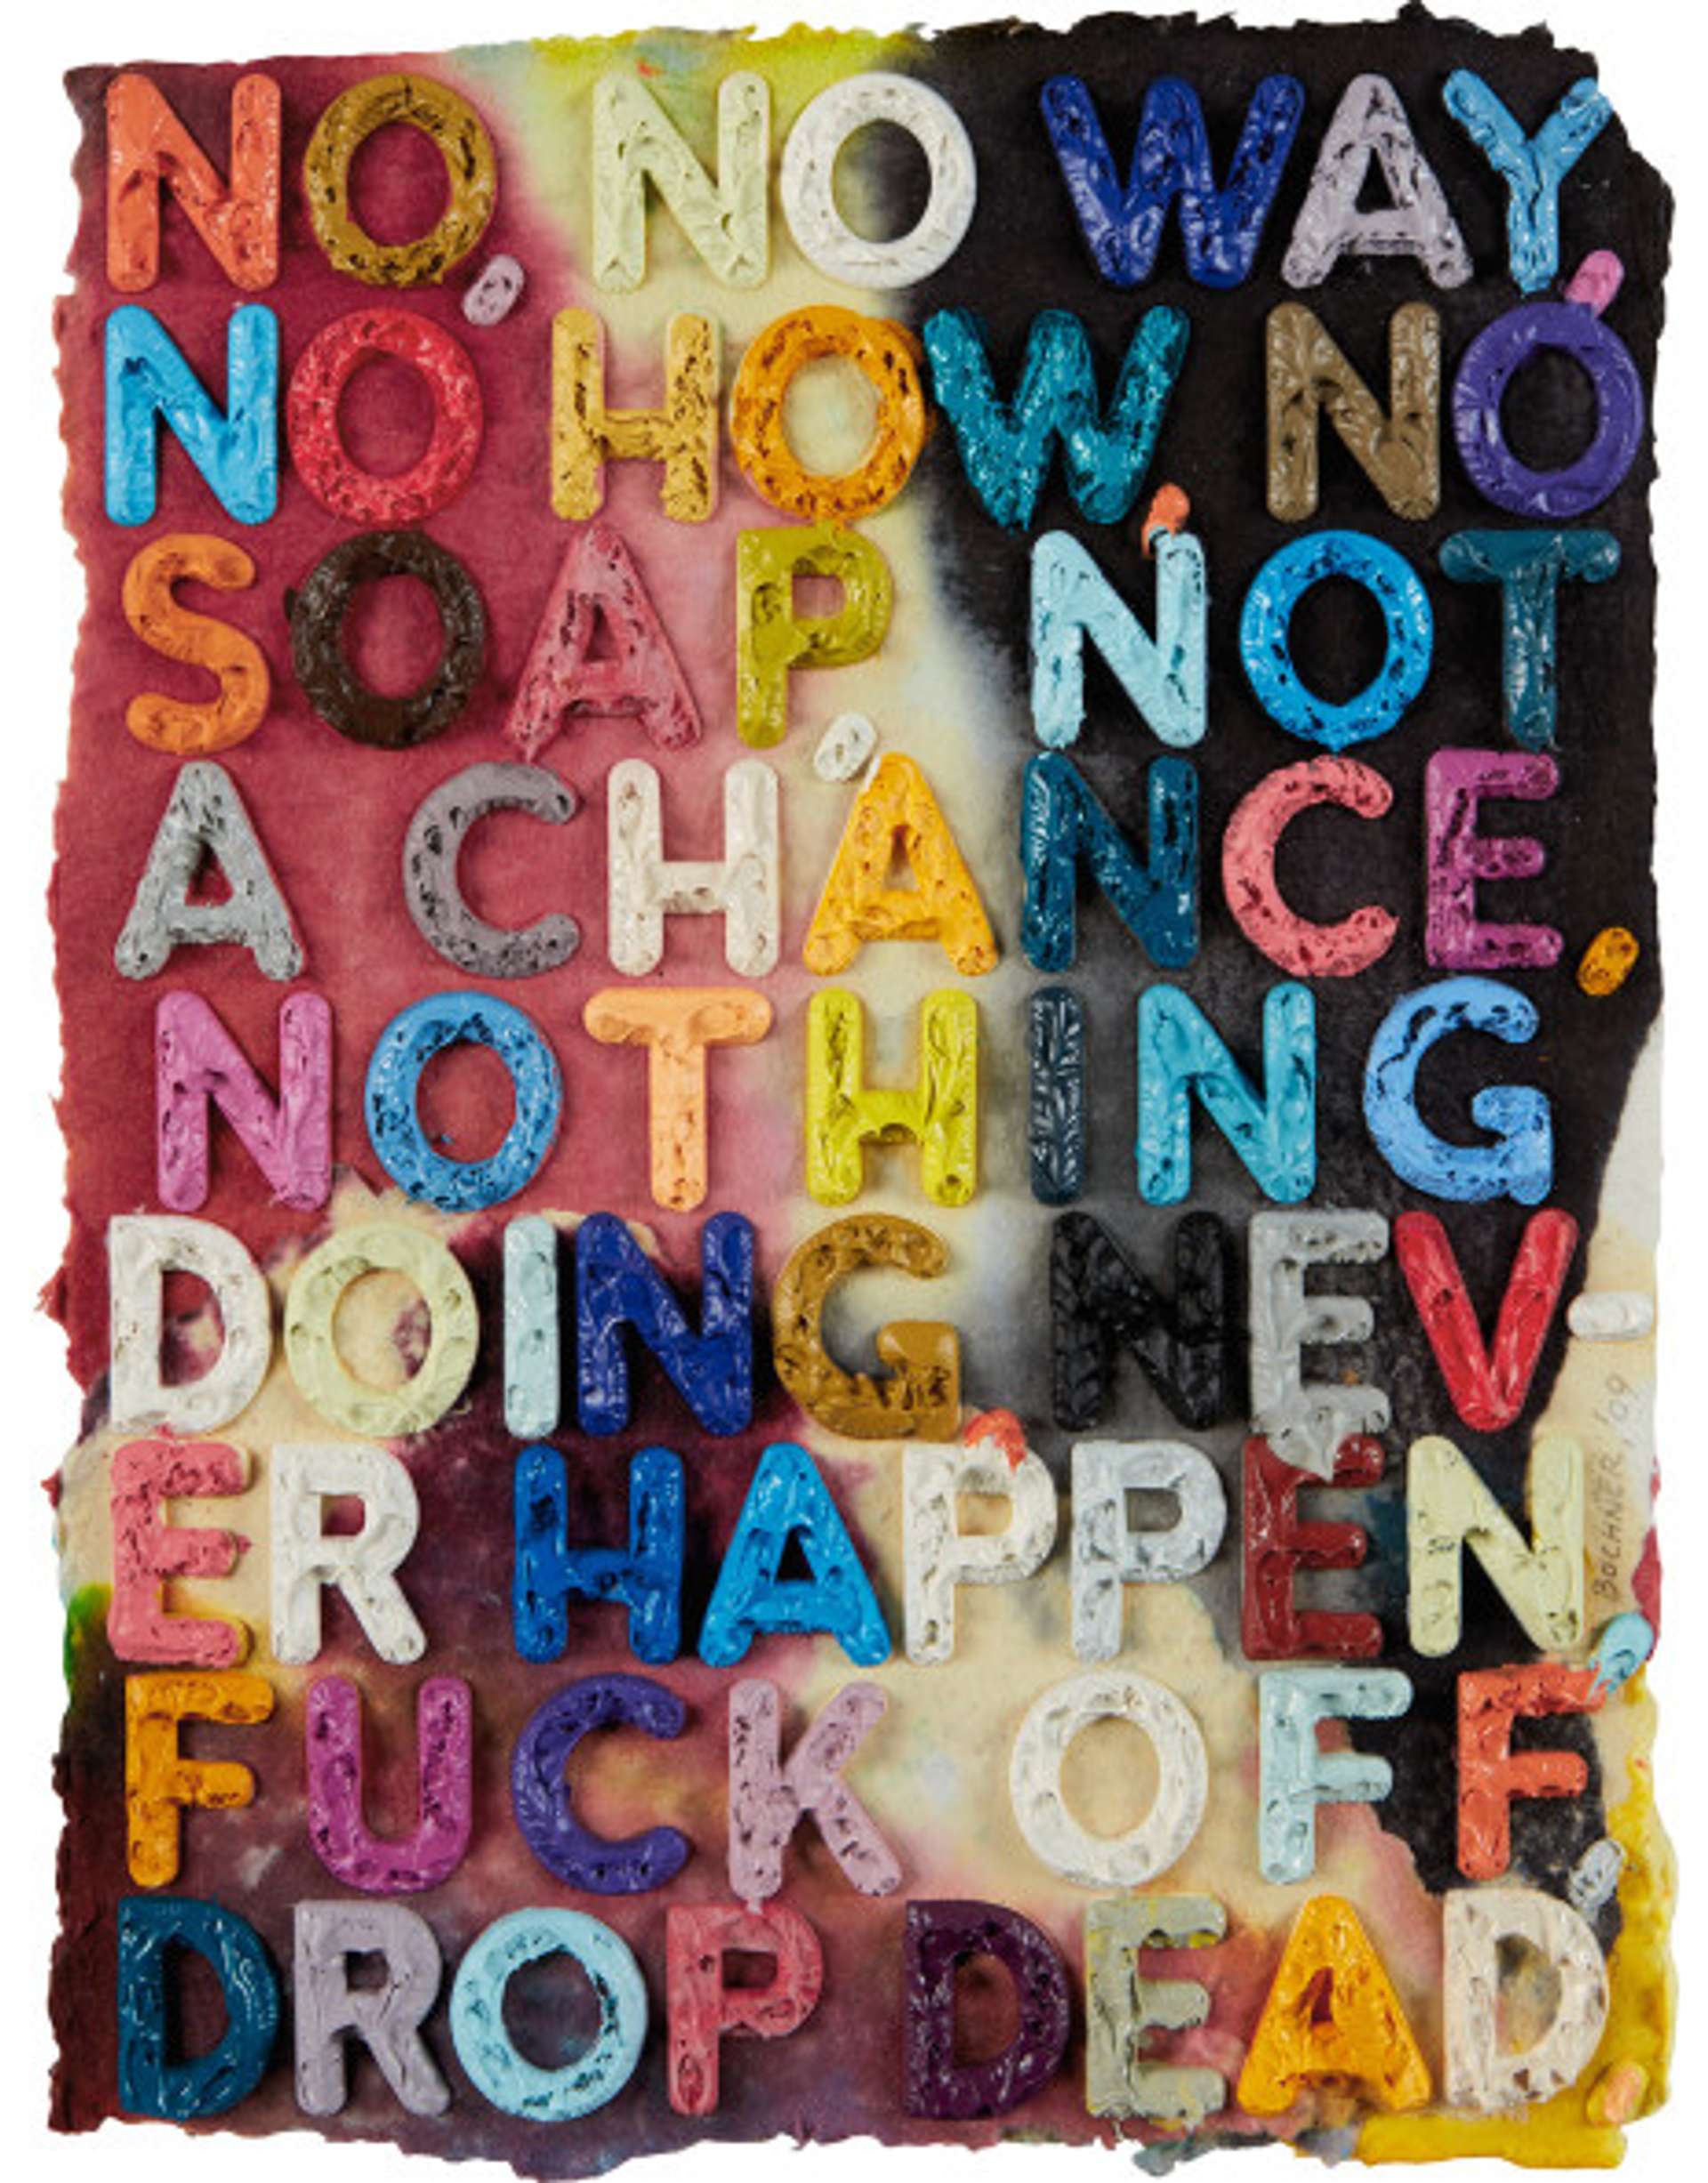 A vibrant and colorful abstract artwork featuring shades of pink, white, yellow, purple, black, blue, and orange. It includes repeating phrases such as "no, no way, no chance, not happening," and more.